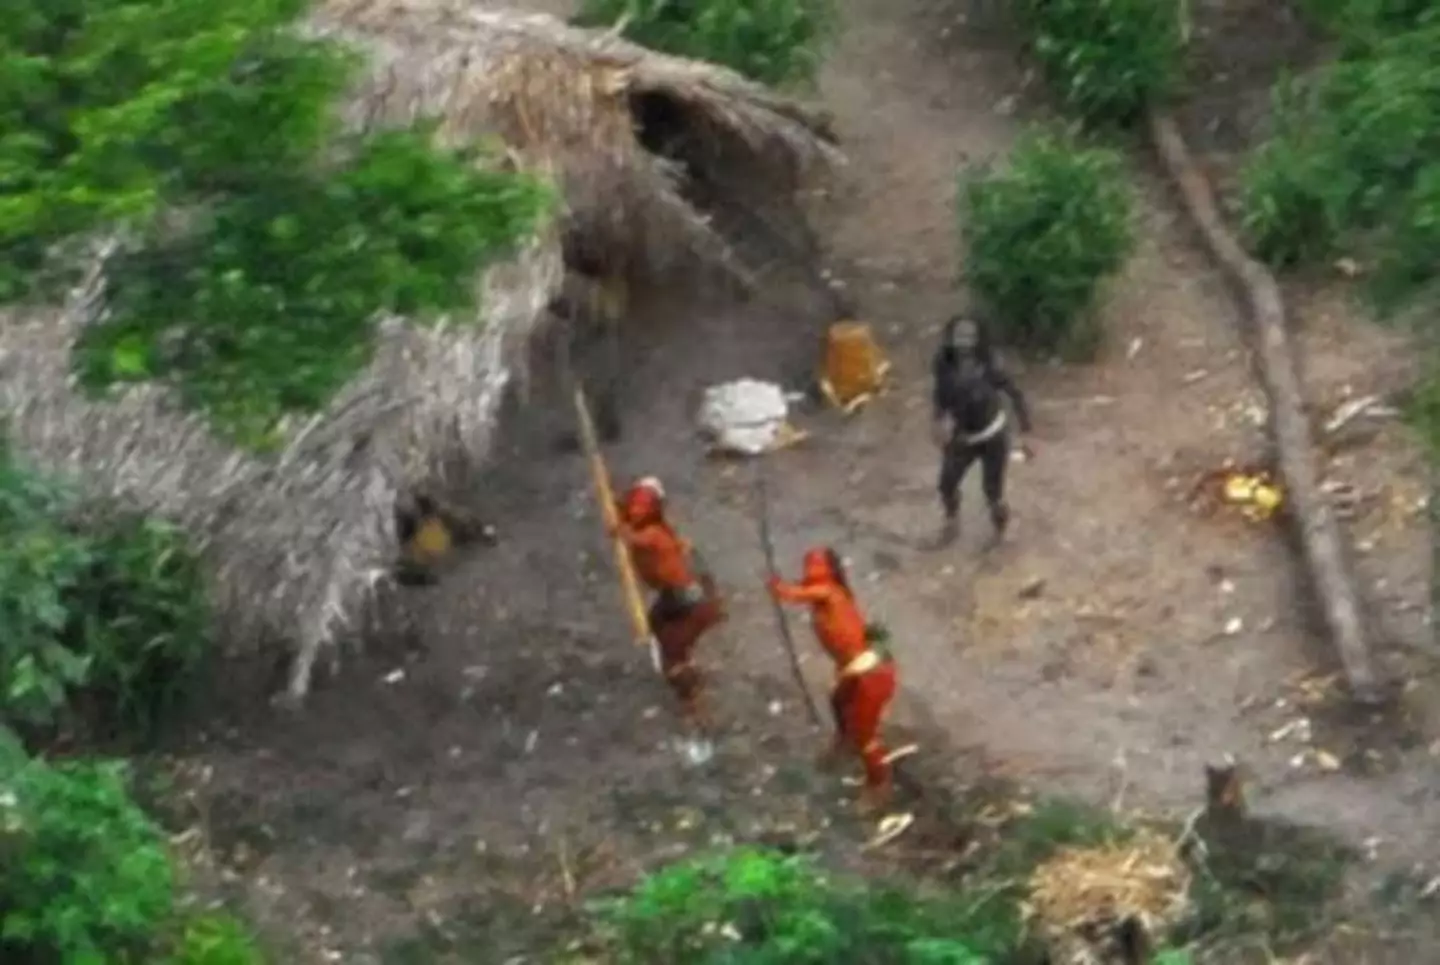 The pictures of the uncontacted tribes people of Brazil were taken in 2008.